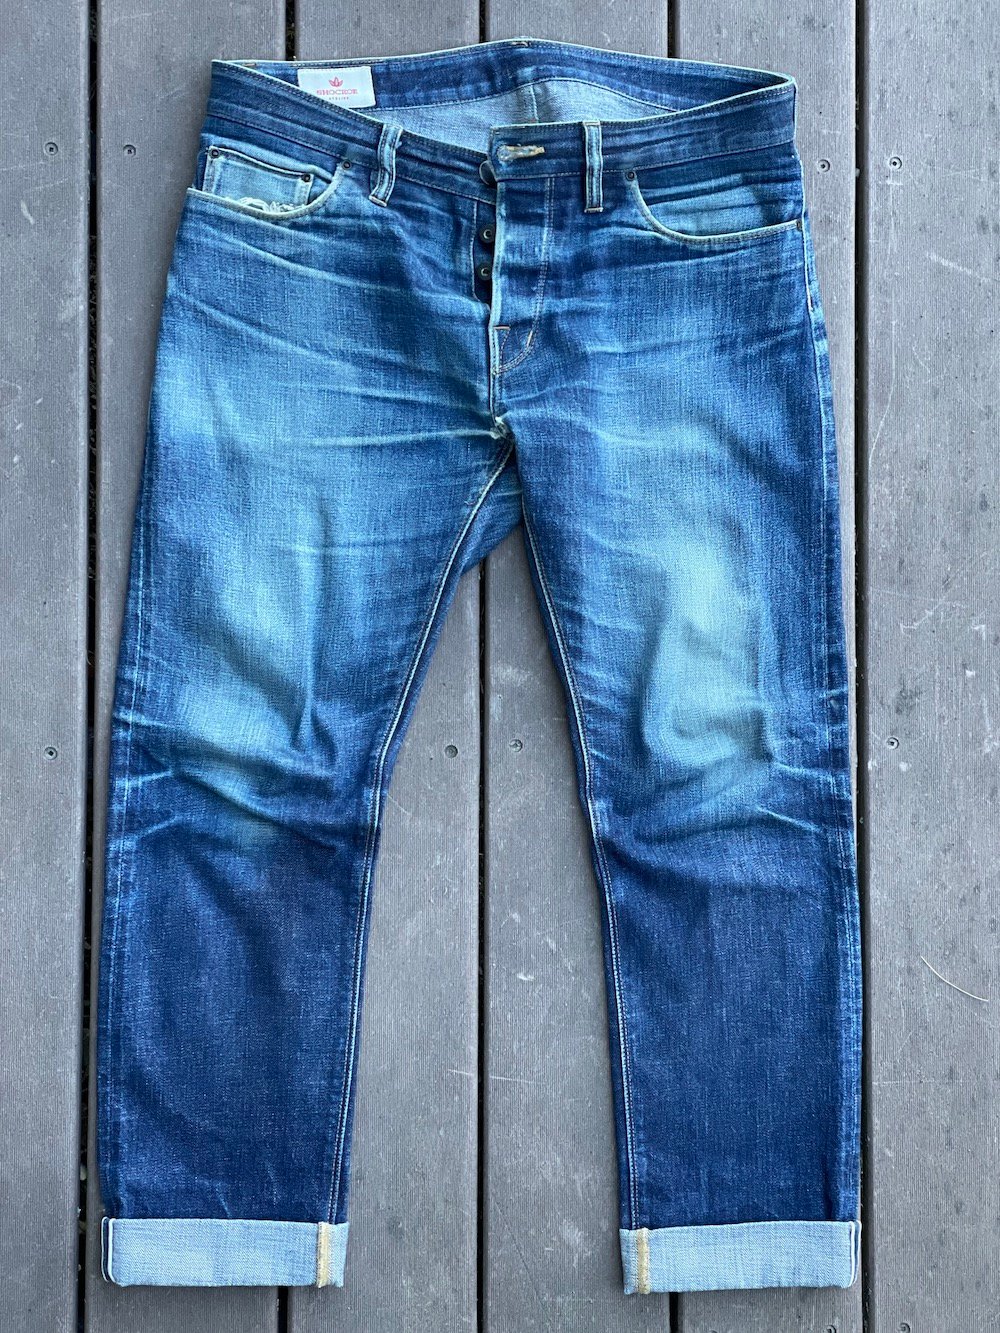 Shockoe Atelier Jeans Review: America's Most Underrated Denim | Stridewise